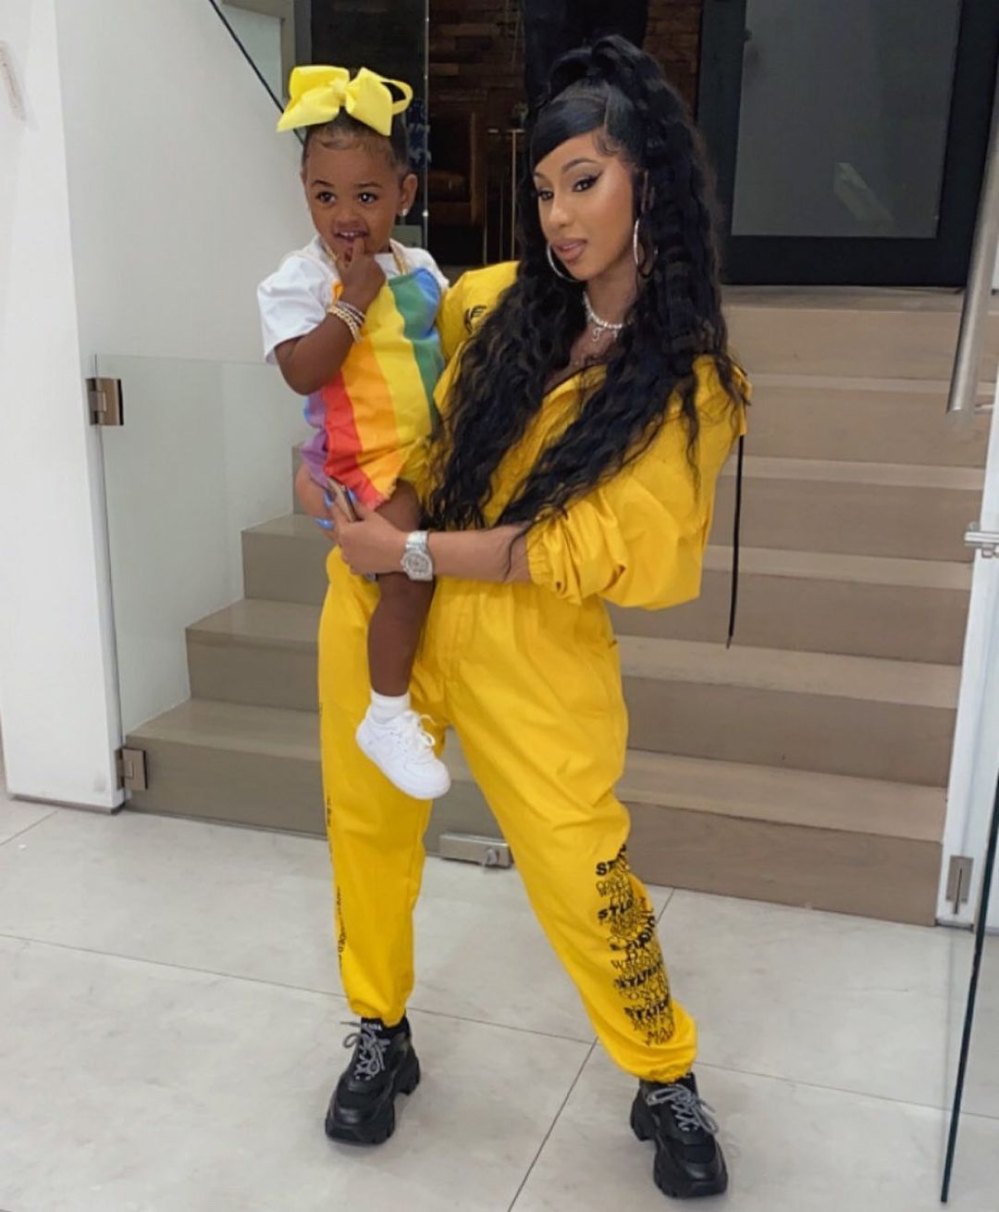 Cardi B Defends Not Letting Daughter Kulture Listen to WAP